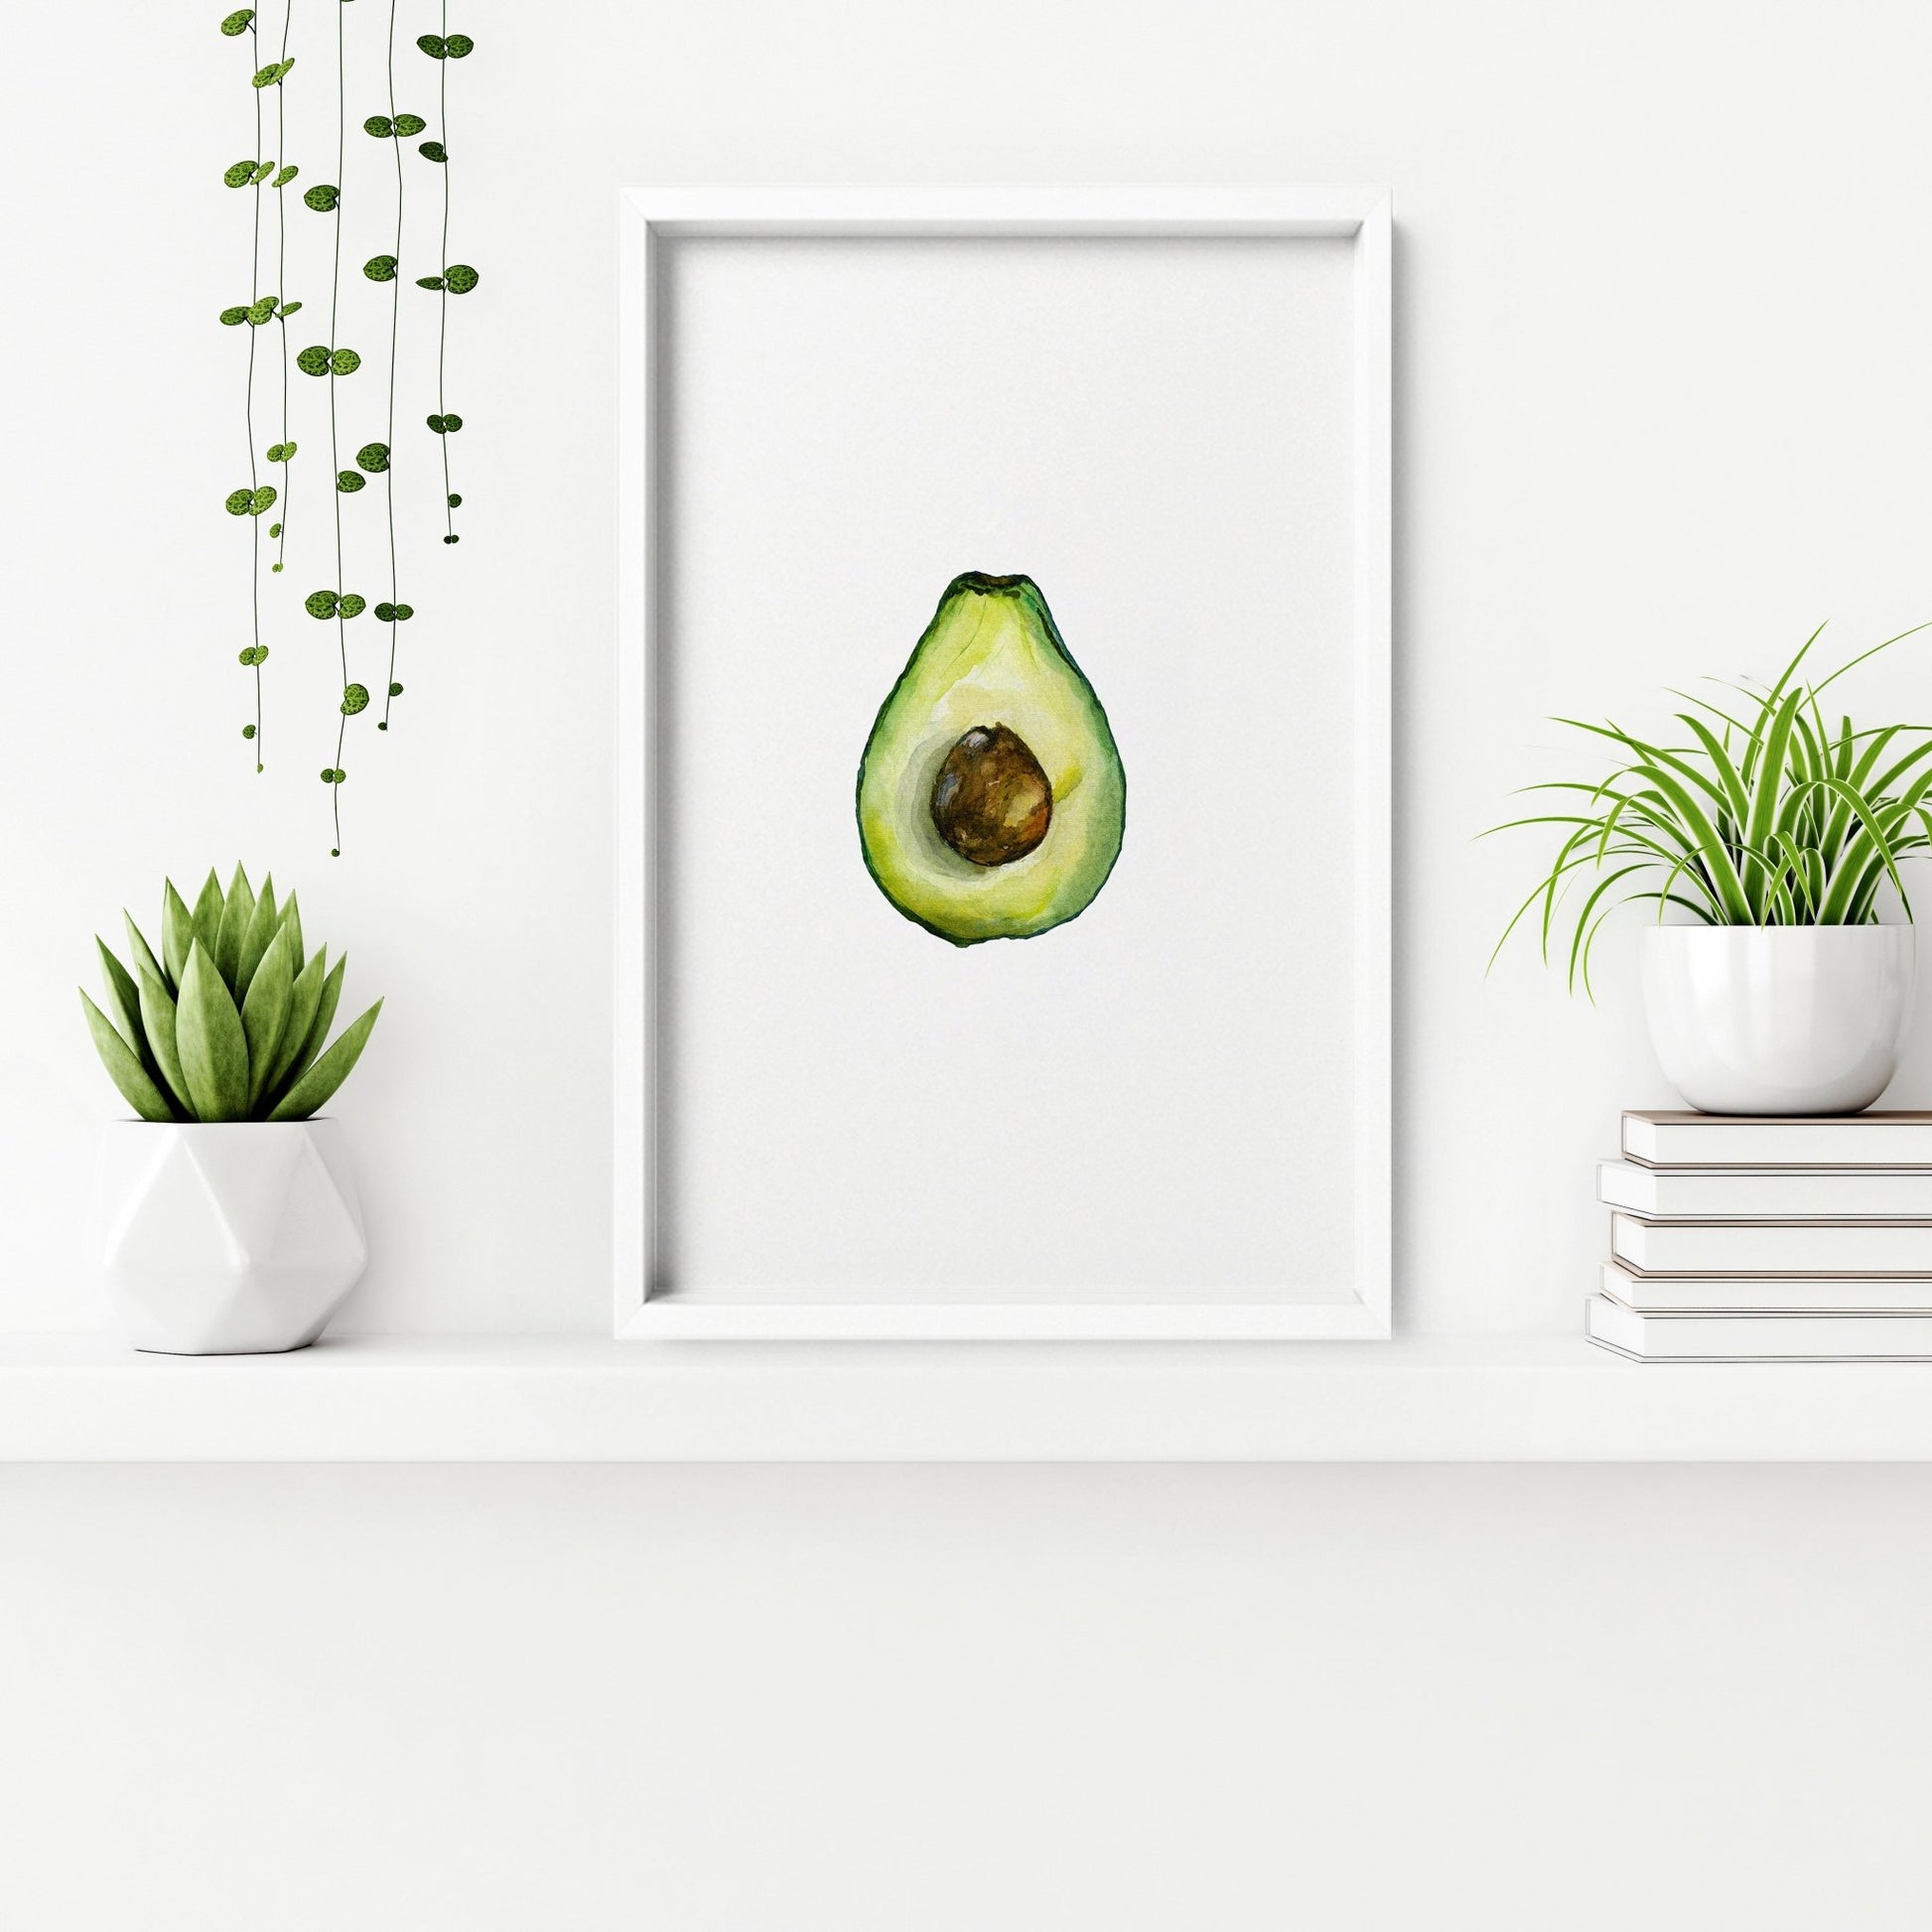 Vegetables Print for kitchen wall | Set of 3 wall art prints - About Wall Art